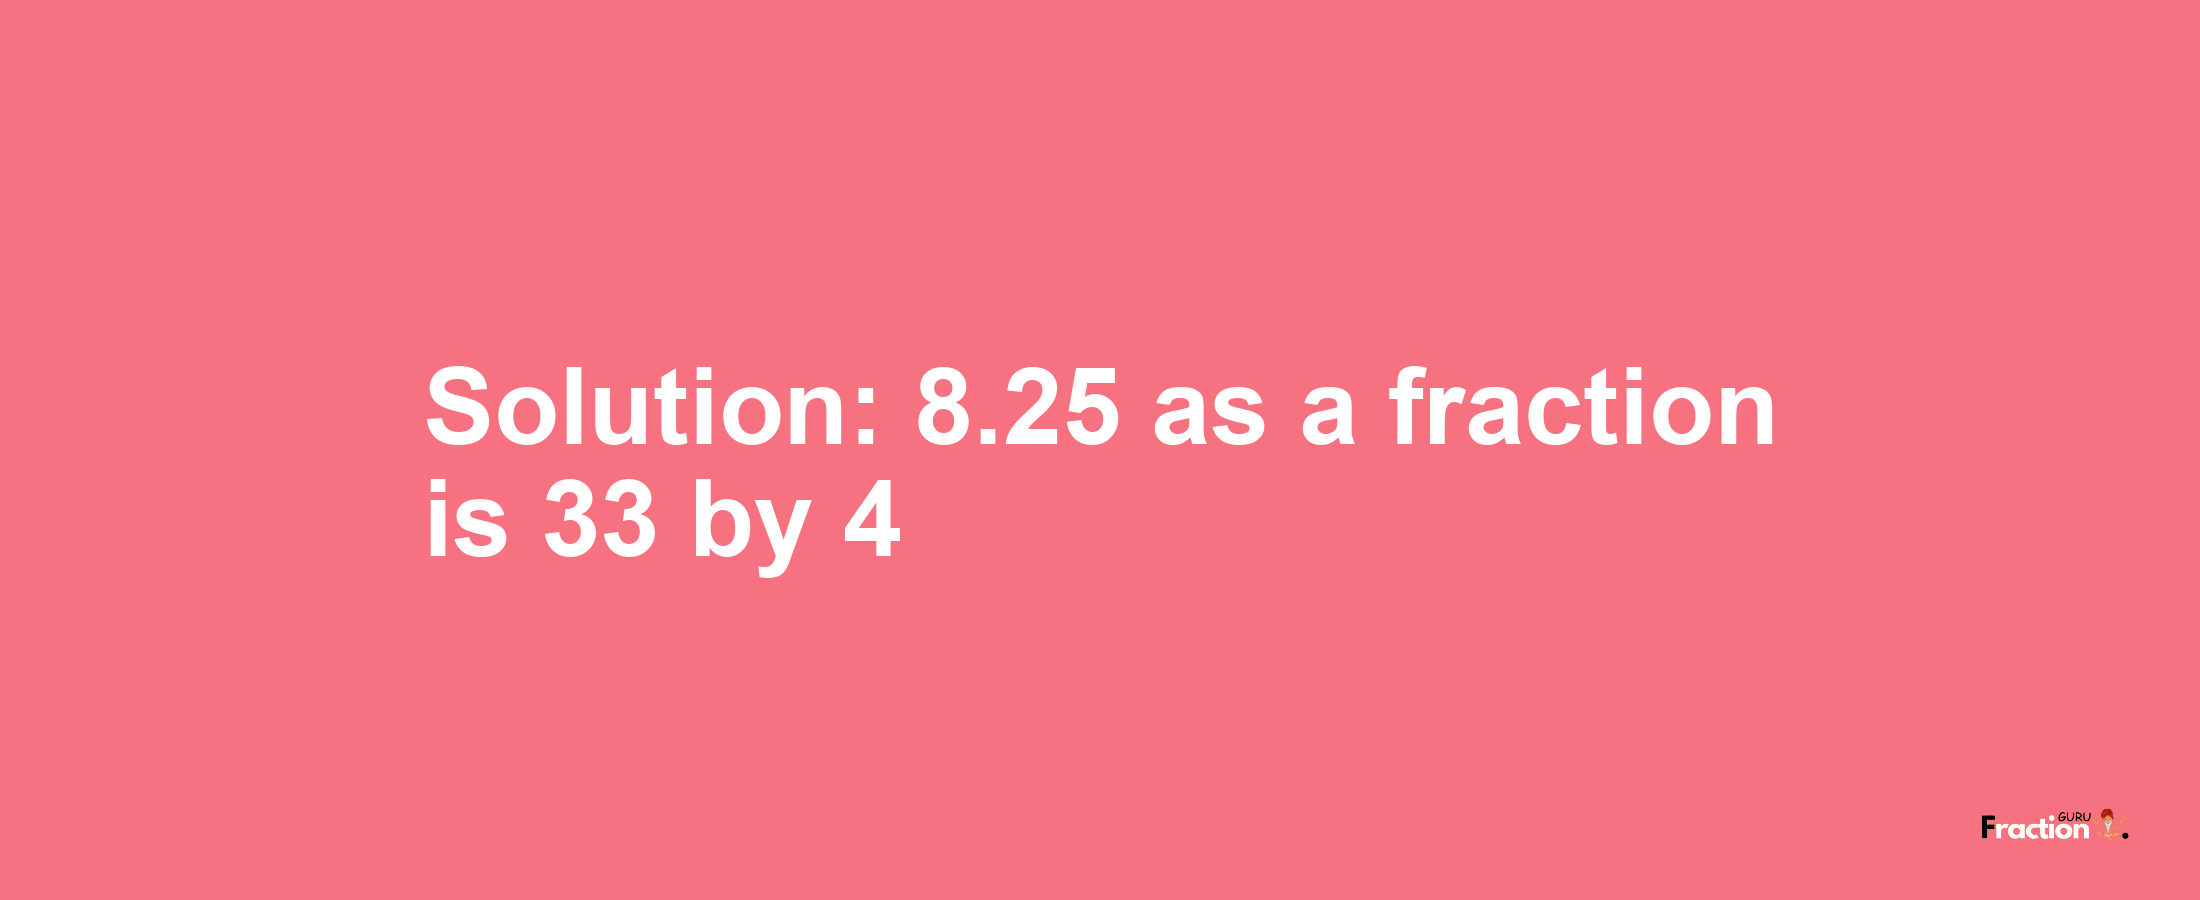 Solution:8.25 as a fraction is 33/4